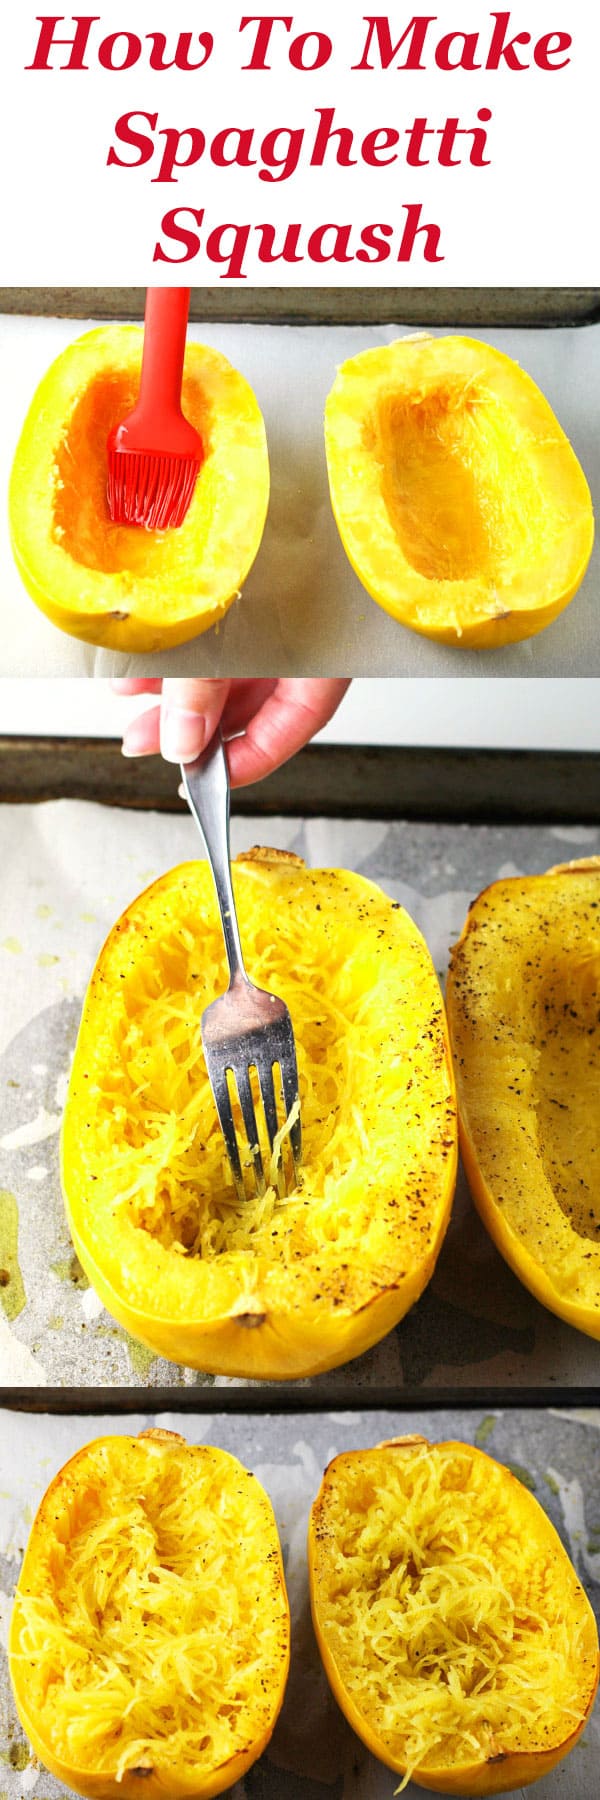 How To Make Spaghetti Squash ~ This is easy peasy and is the perfect replacement for regular pasta!